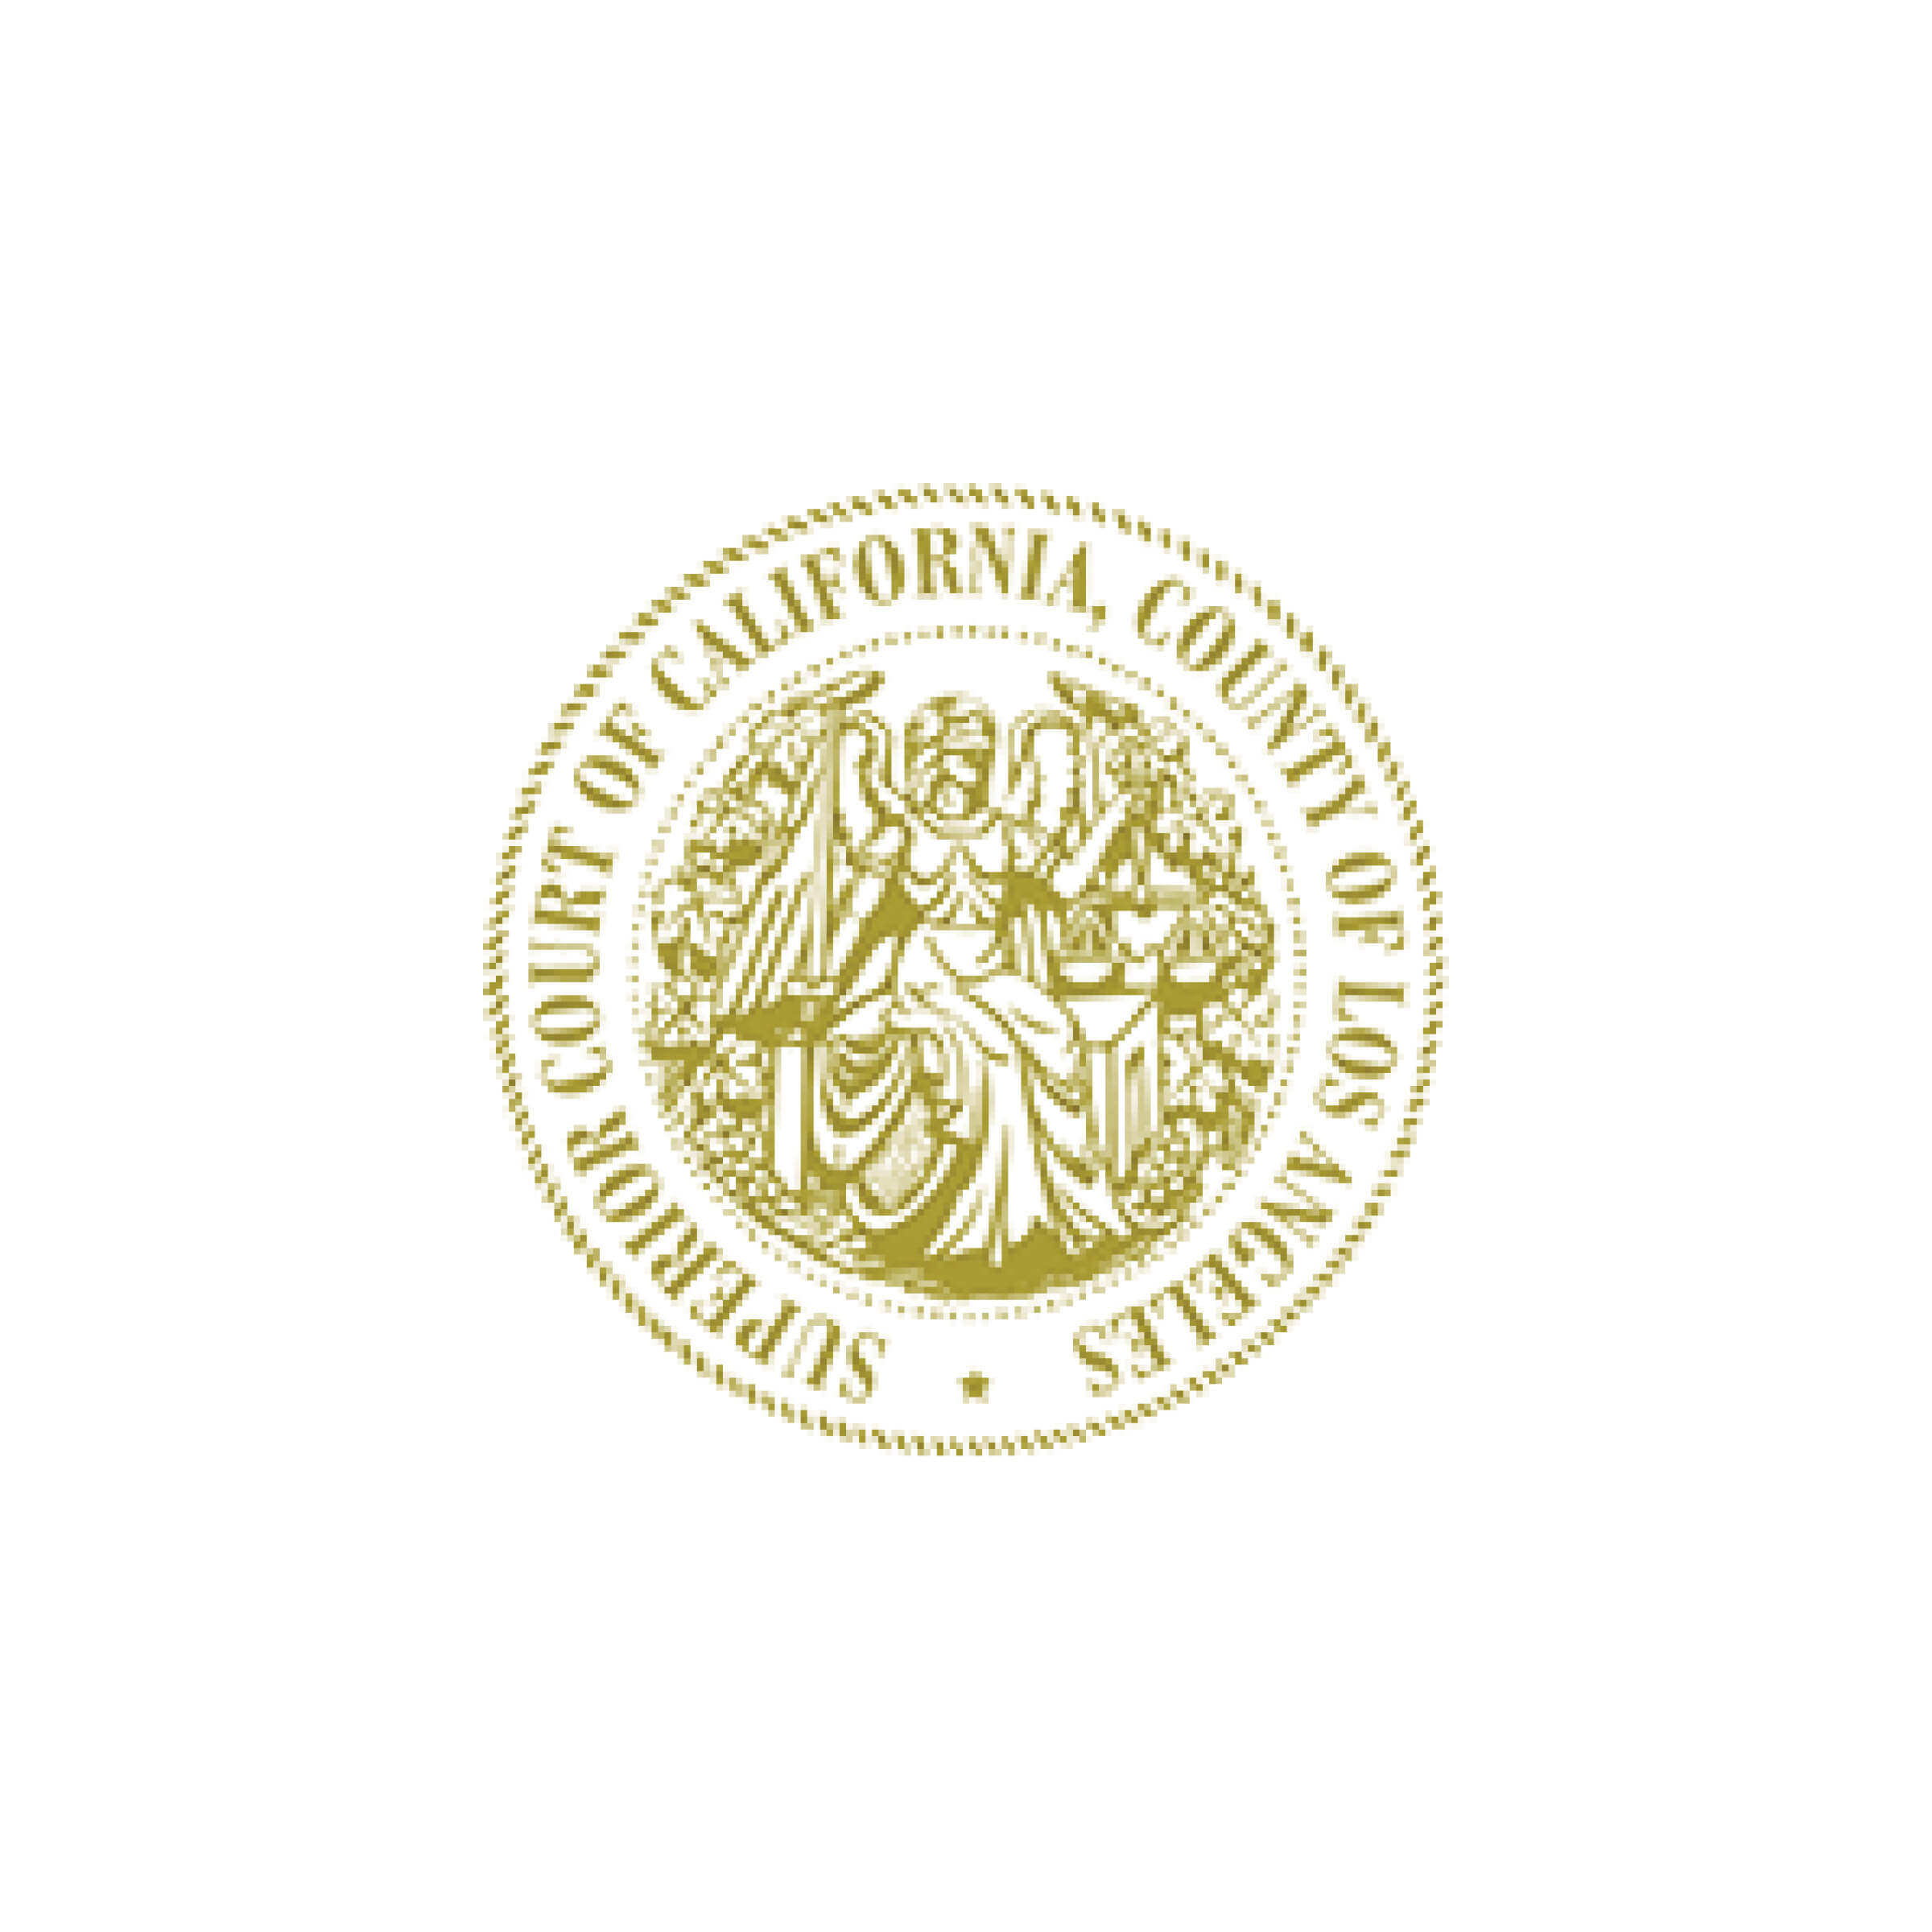 Superior Court of California, County of Los Angeles